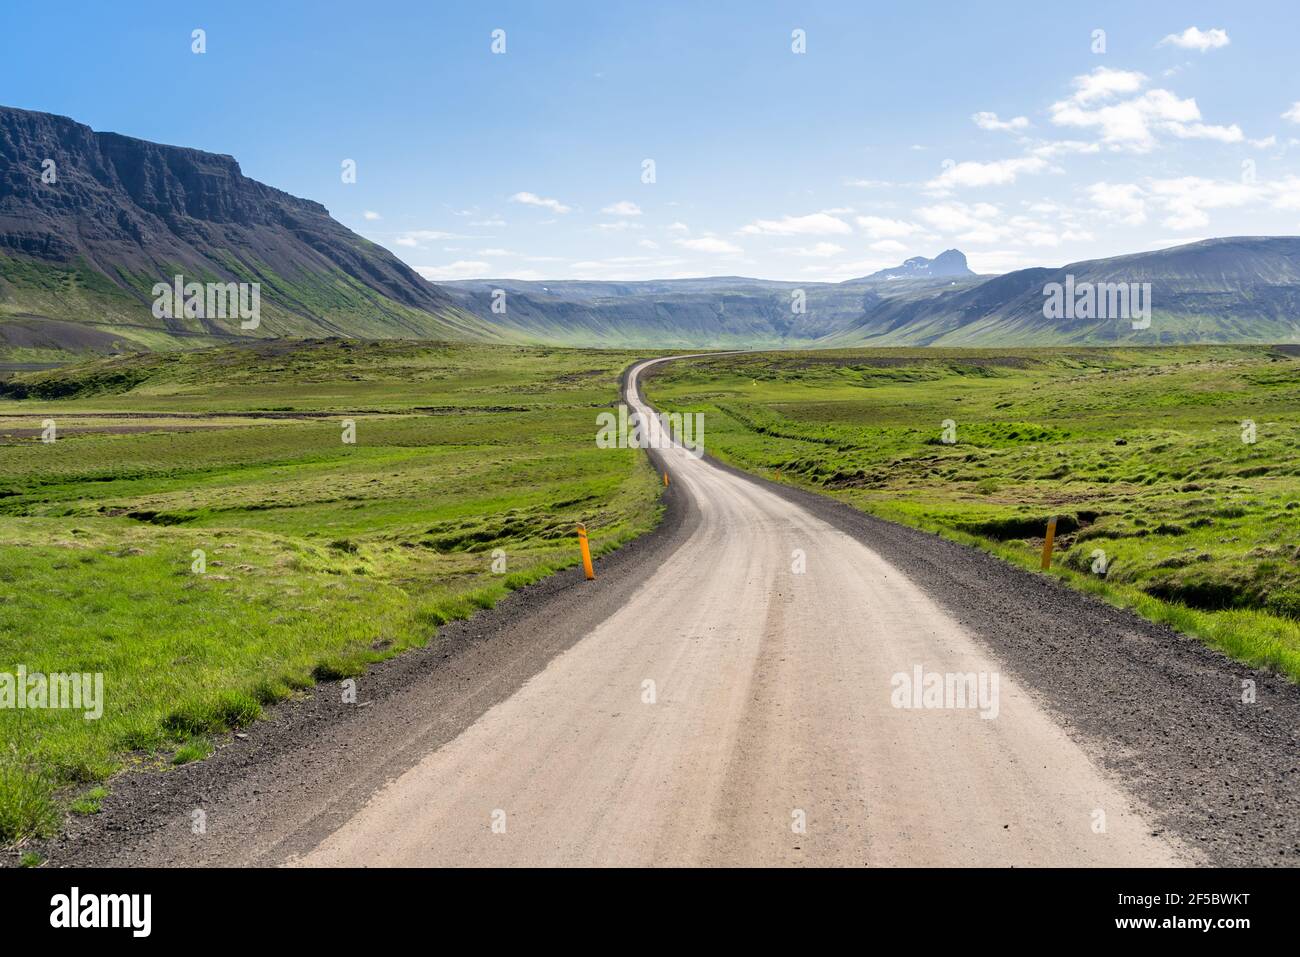 Windind unmade road running through a grassy valley on a clear summer day Stock Photo